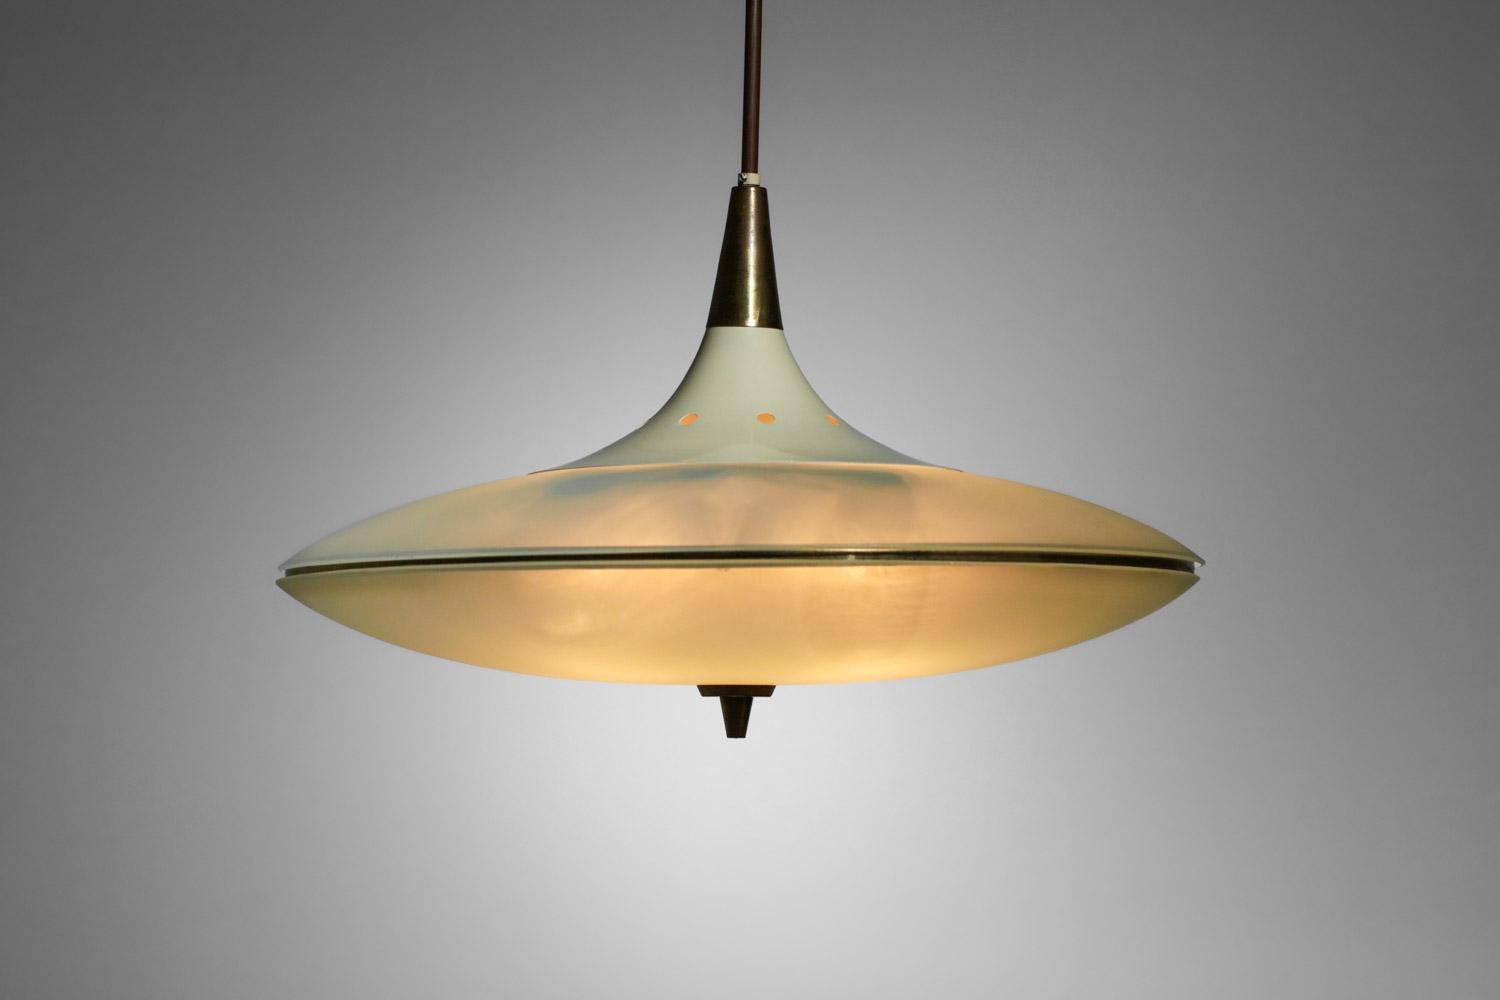 Hanging lamp from the 1950s by Italian designer Pietro Chiesa. Structure of the arm and the cup in solid brass and white lacquered metal. Diffuser with a double saucer shaped opaque frosted glass. Excellent vintage condition with very slight traces